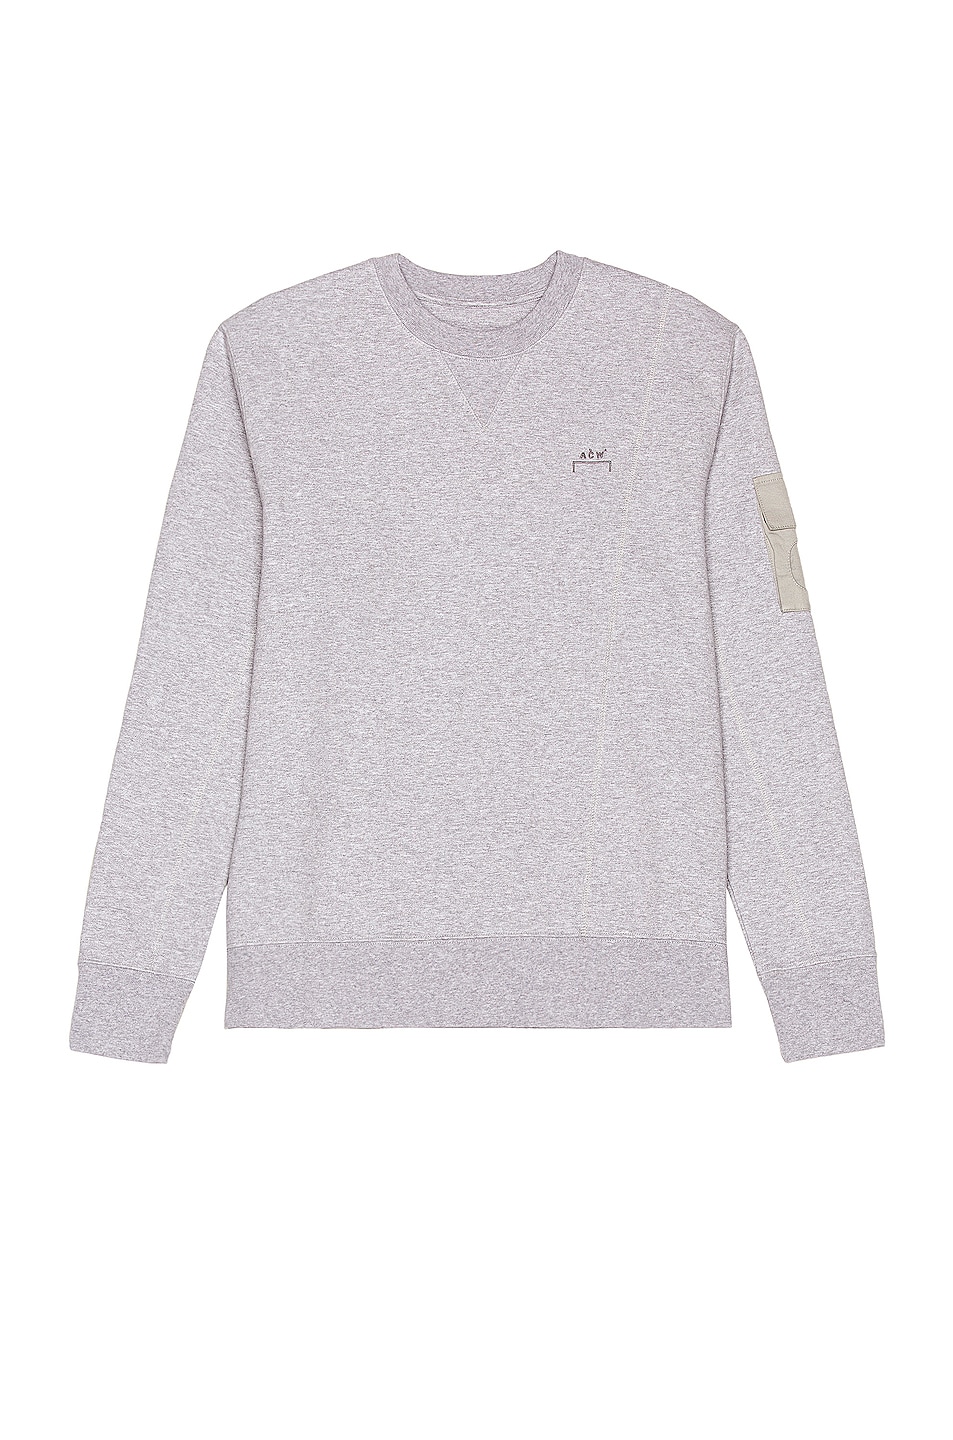 Image 1 of A-COLD-WALL* Essential Crewneck in Grey Melange